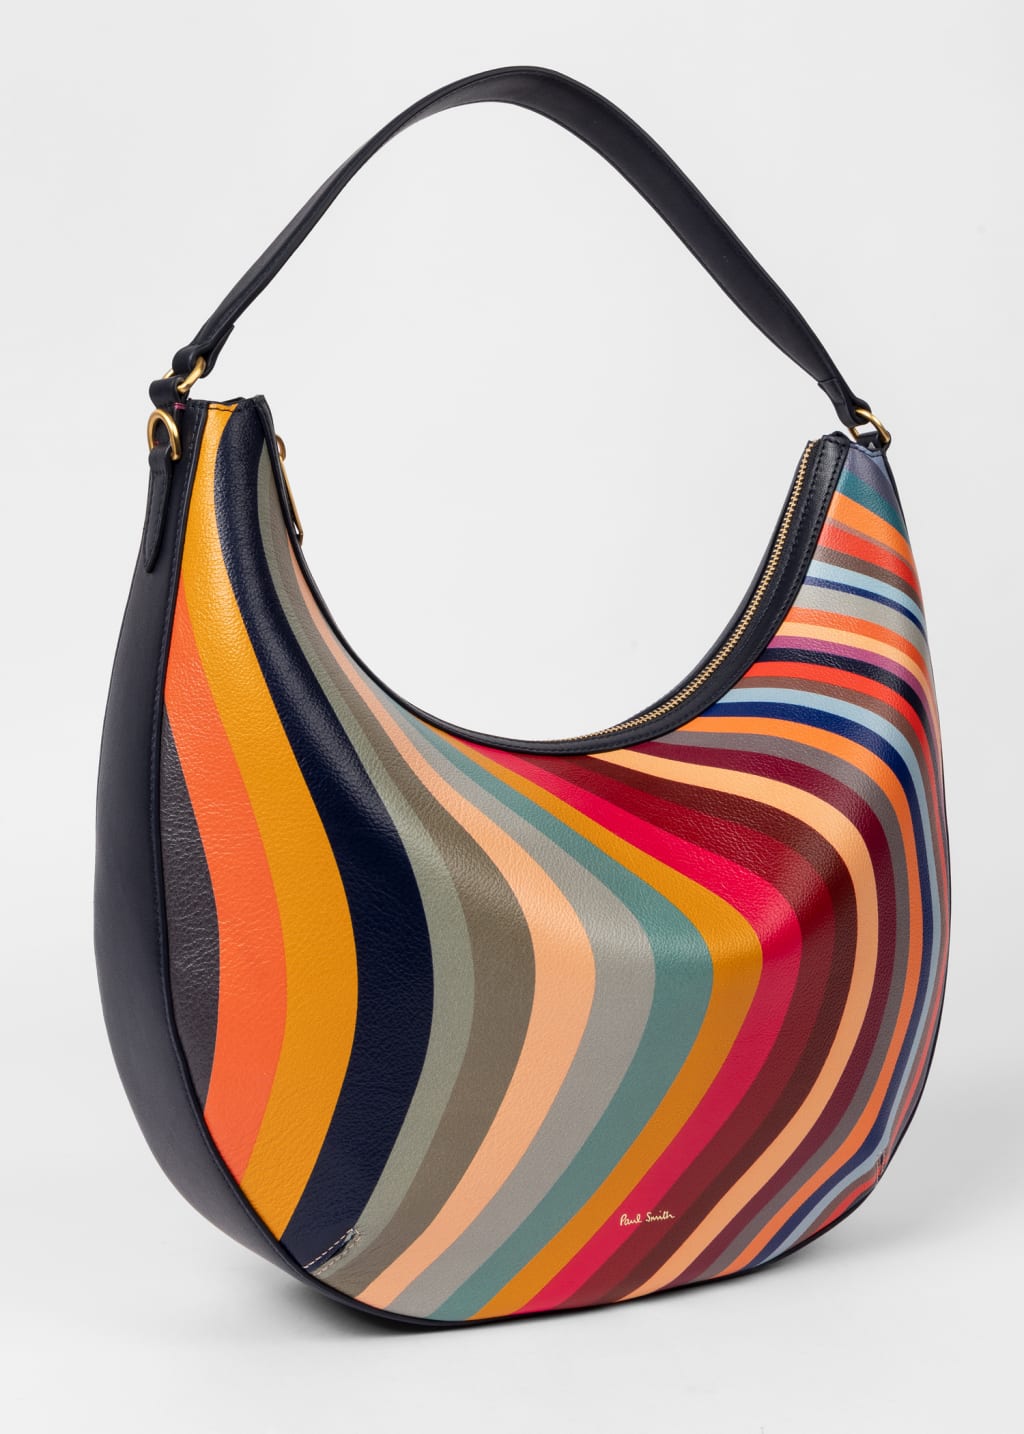 Product View - Women's 'Swirl' Leather Medium Round Hobo Bag by Paul Smith